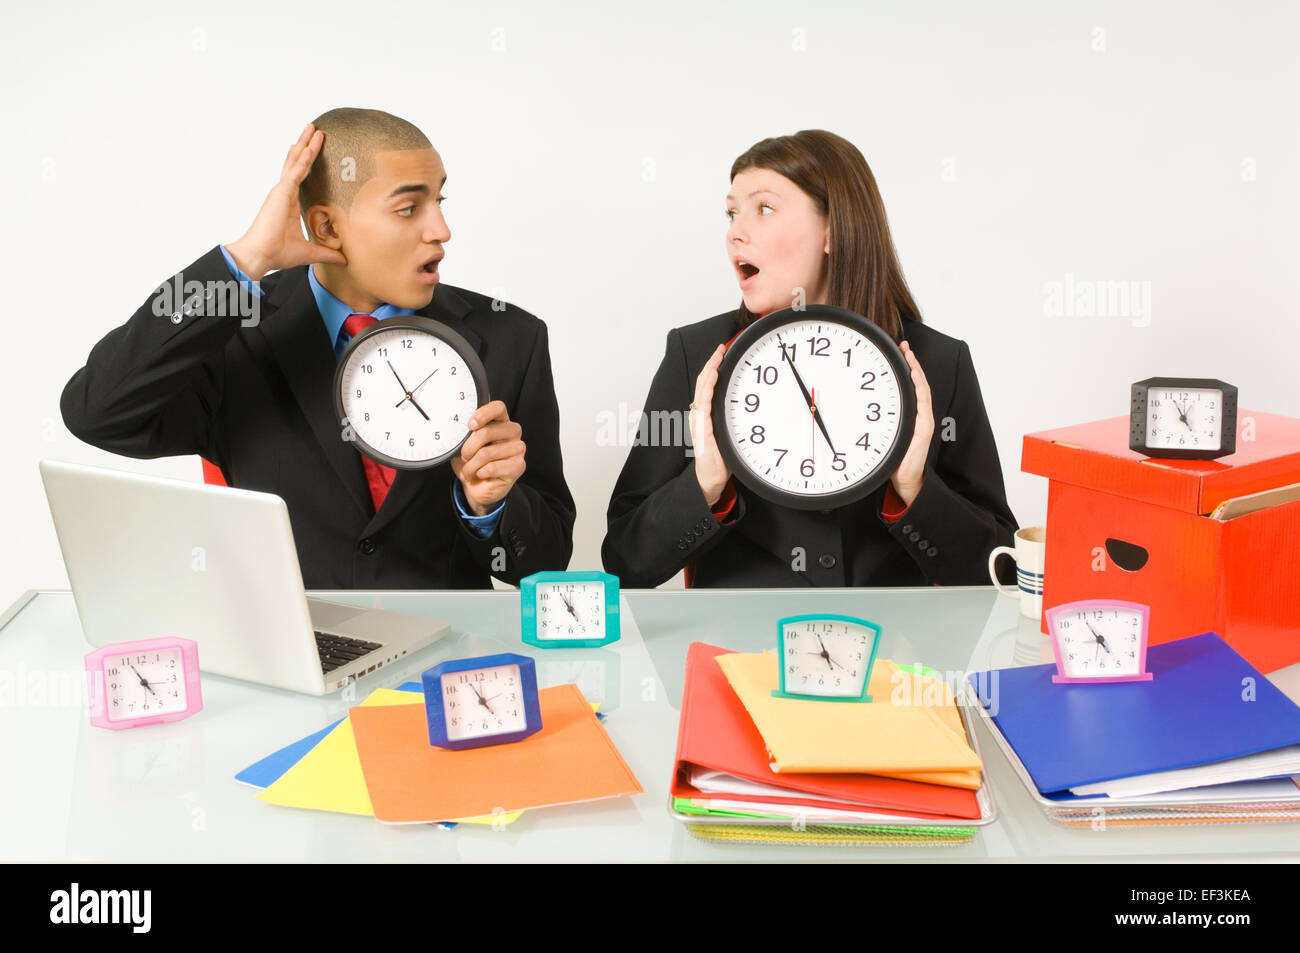 Colleagues holding clocks Stock Photo